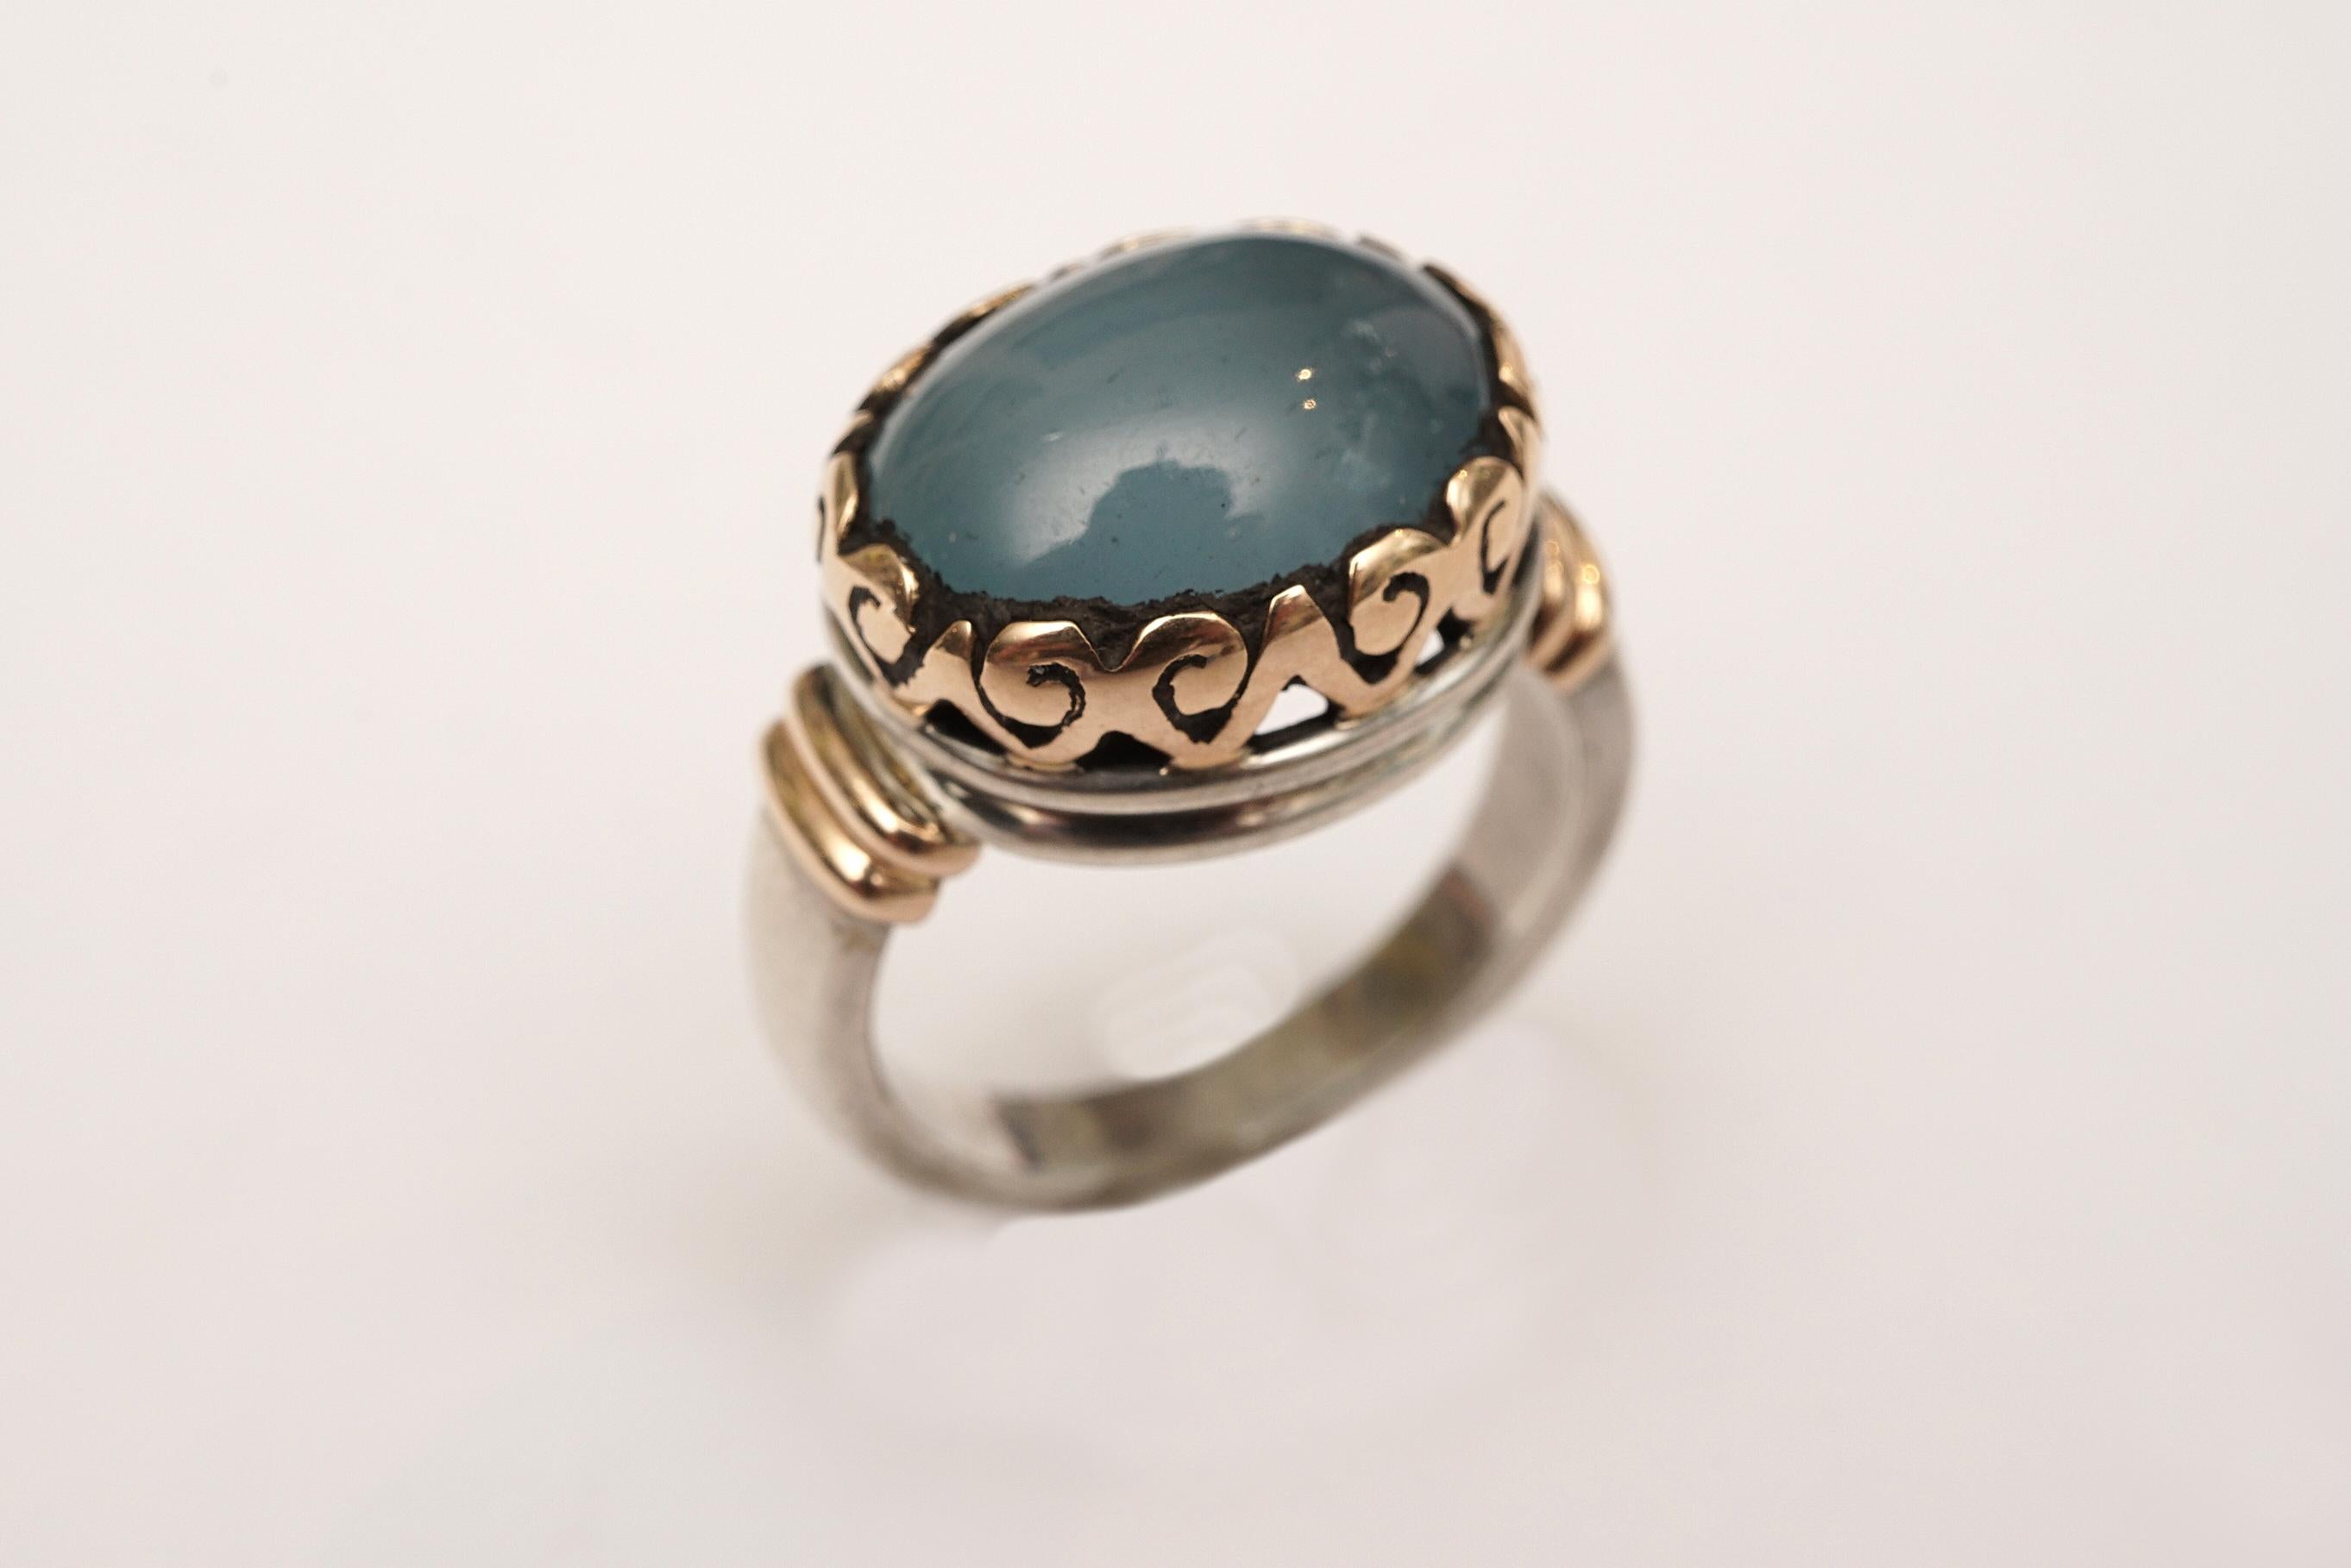 A large cabochon aquamarine in an usual and beautiful 18K gold bezel setting (not plated) and sterling silver band. Ring size is 7.